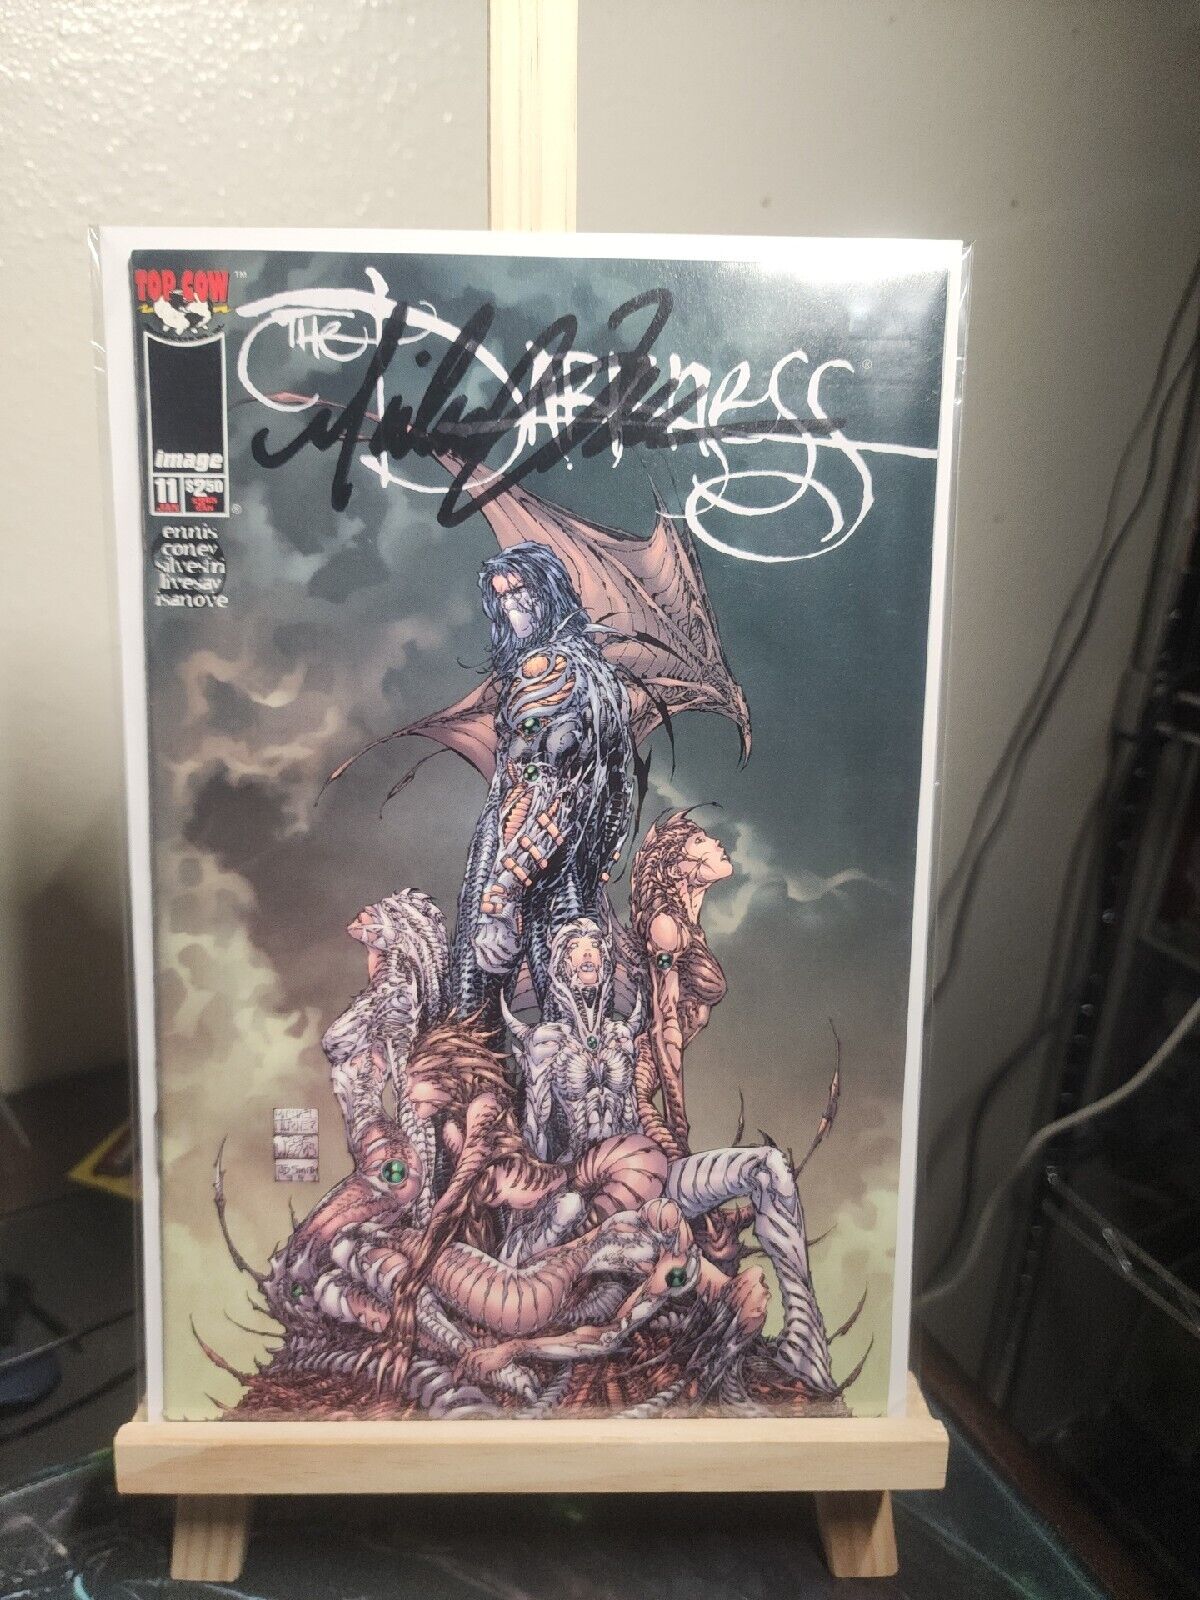 The Darkness #11 Signed By Michael Turner.